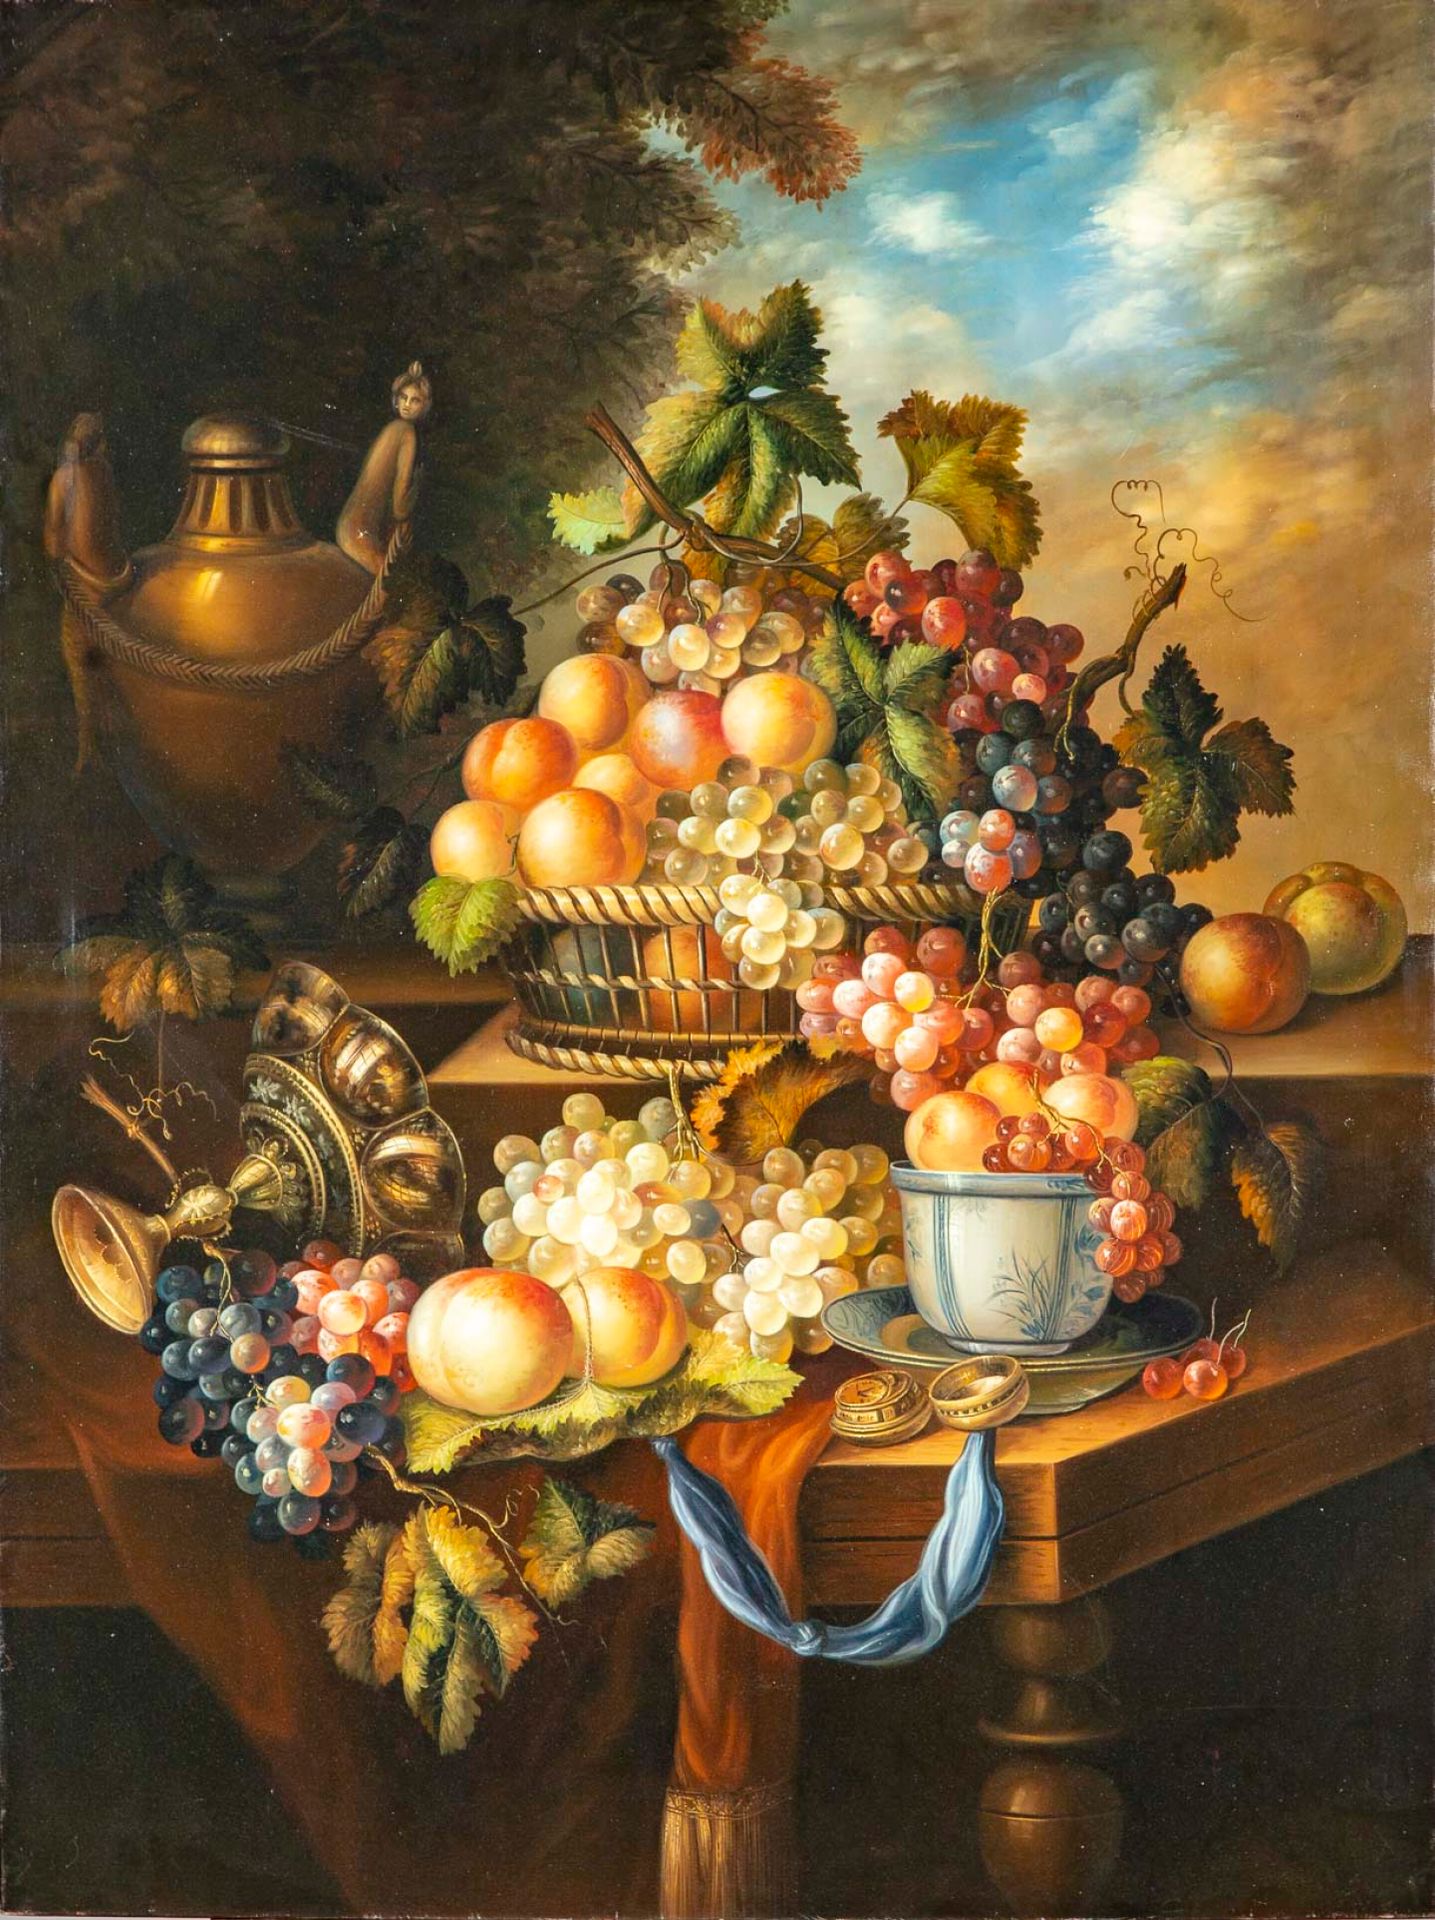 Null After a 17th century HOLLAND SCHOOL

Still life with grapes

Decorative pro&hellip;